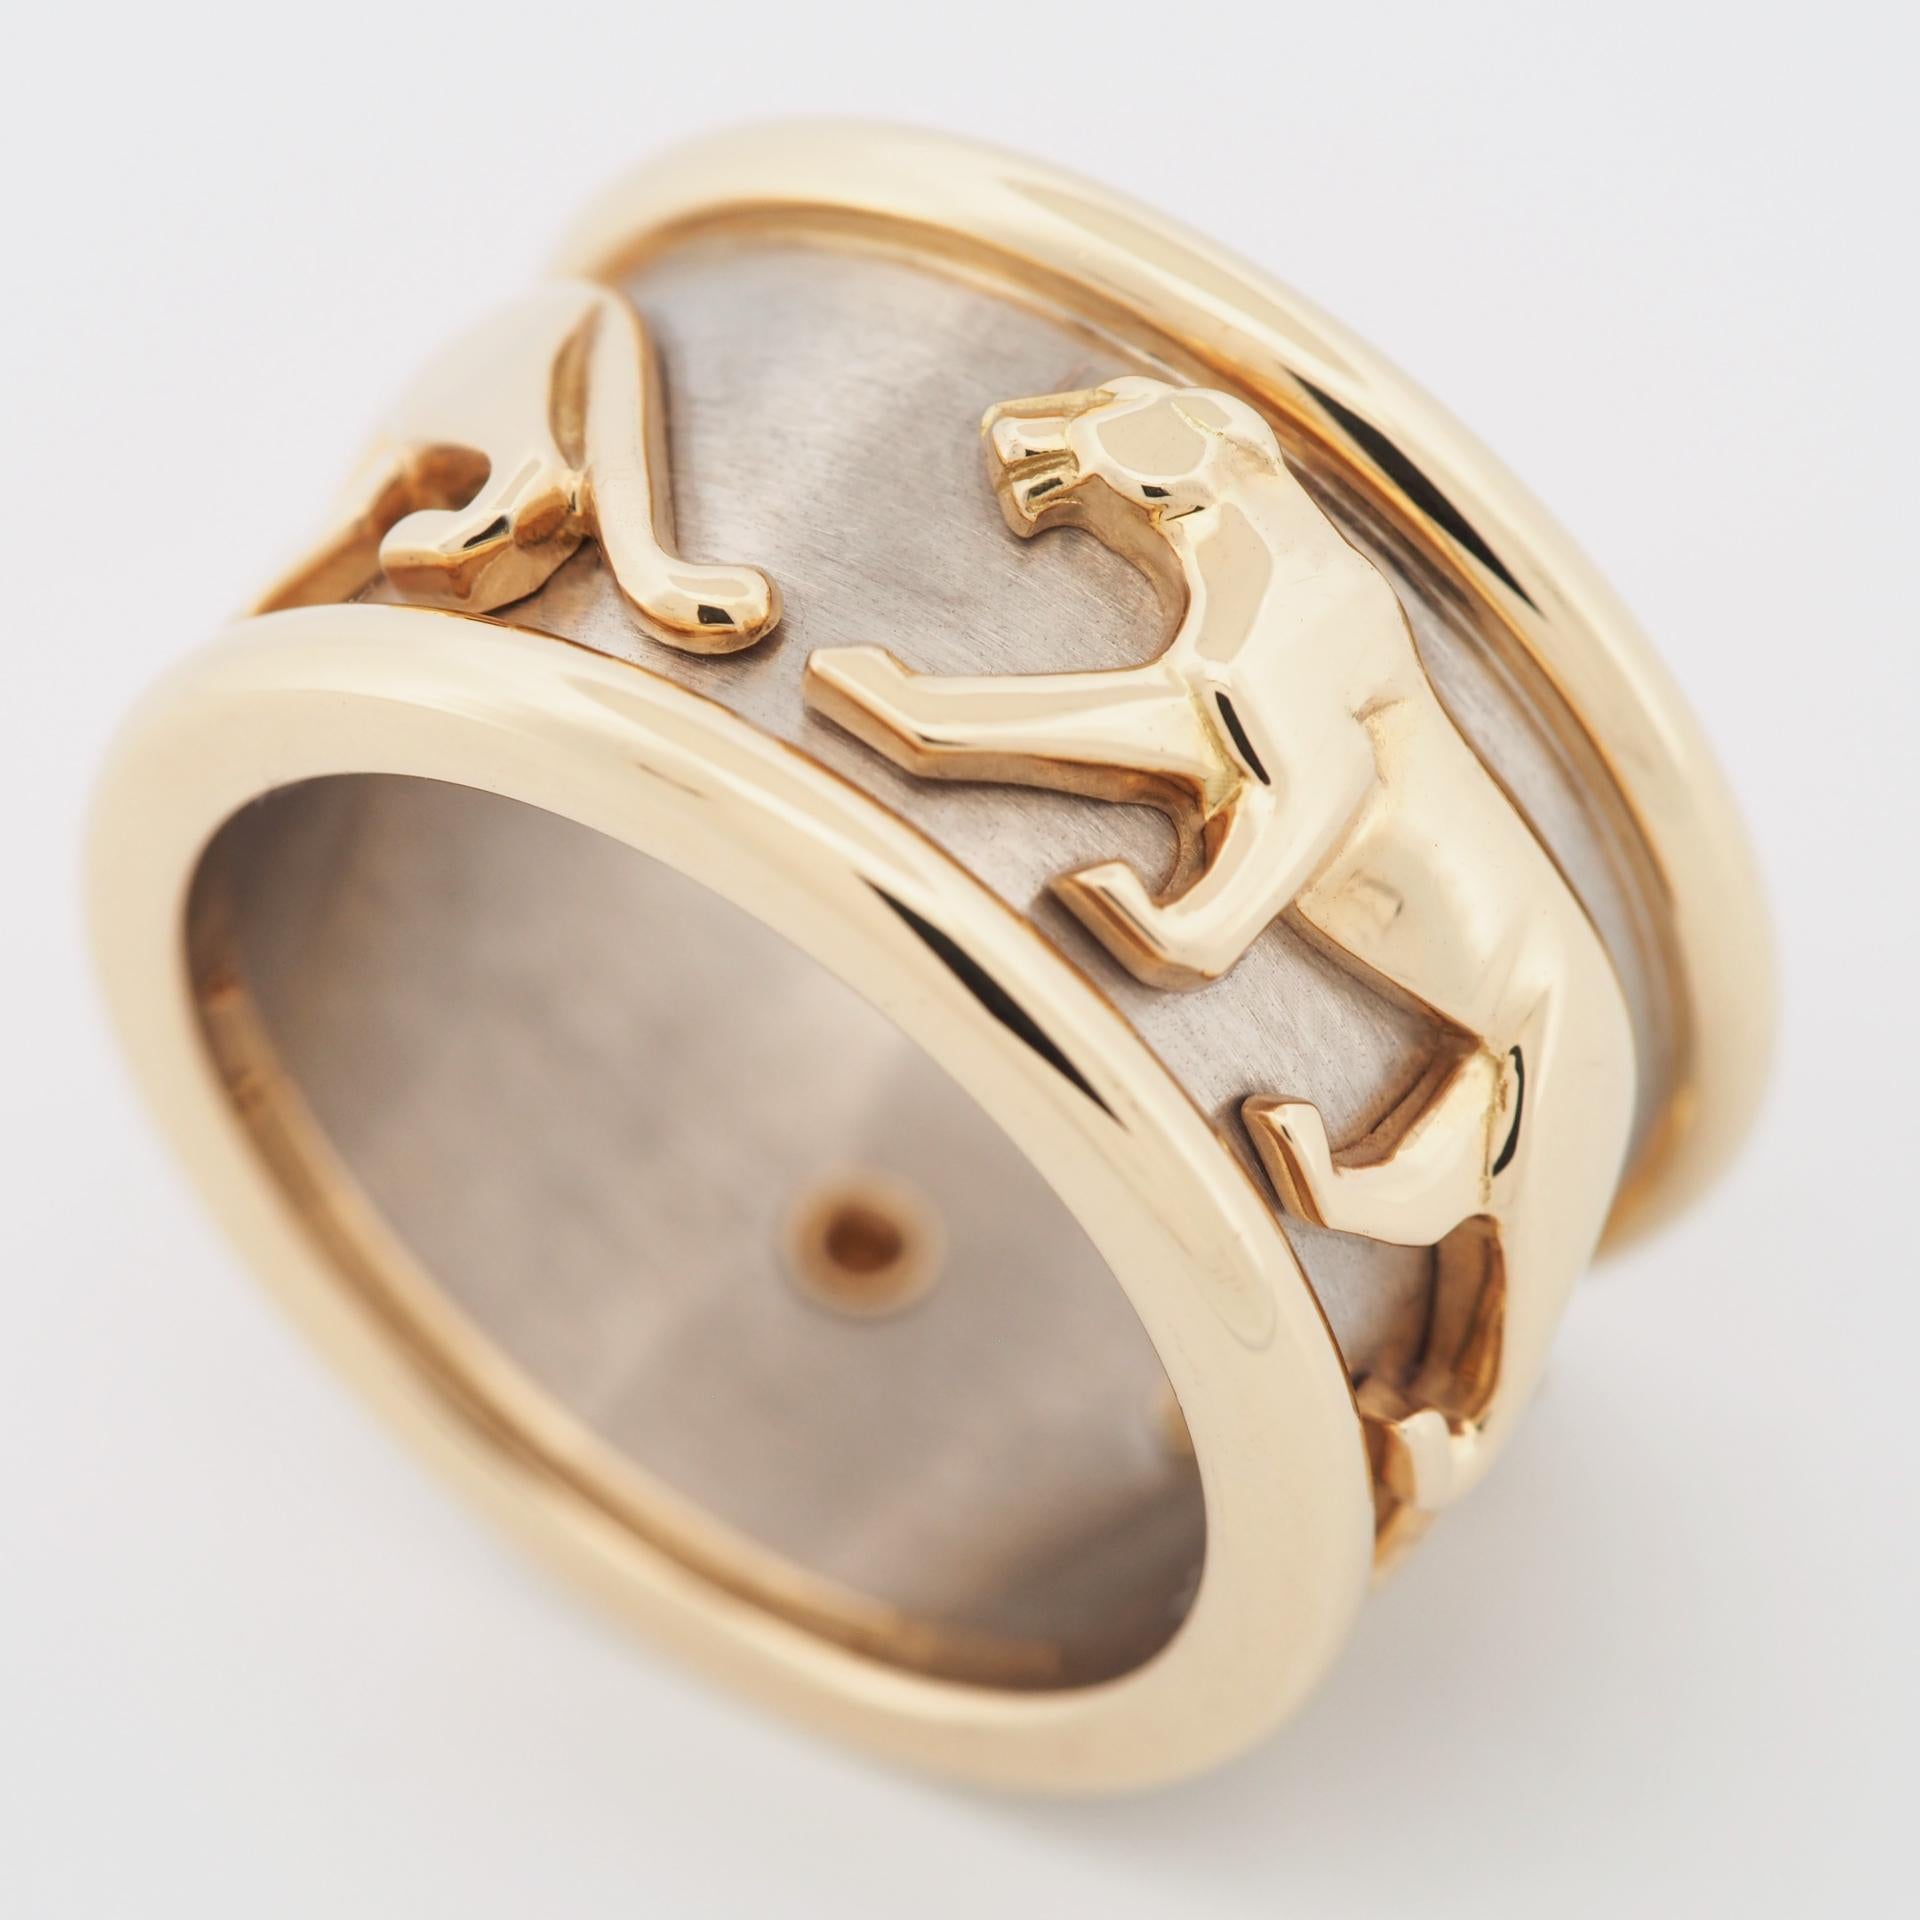 Item: Authentic Cartier Walking Panther Ring 
Stones: ---
Metal: 18K Yellow & White Gold
Ring Size: 52 US SIZE 5.75 UK SIZE K 1/2
Internal Diameter:  16.25 mm
Measurement:  12.0 mm width
Weight:  12.7 Grams
Condition: Used (repolished)
Retail Price: